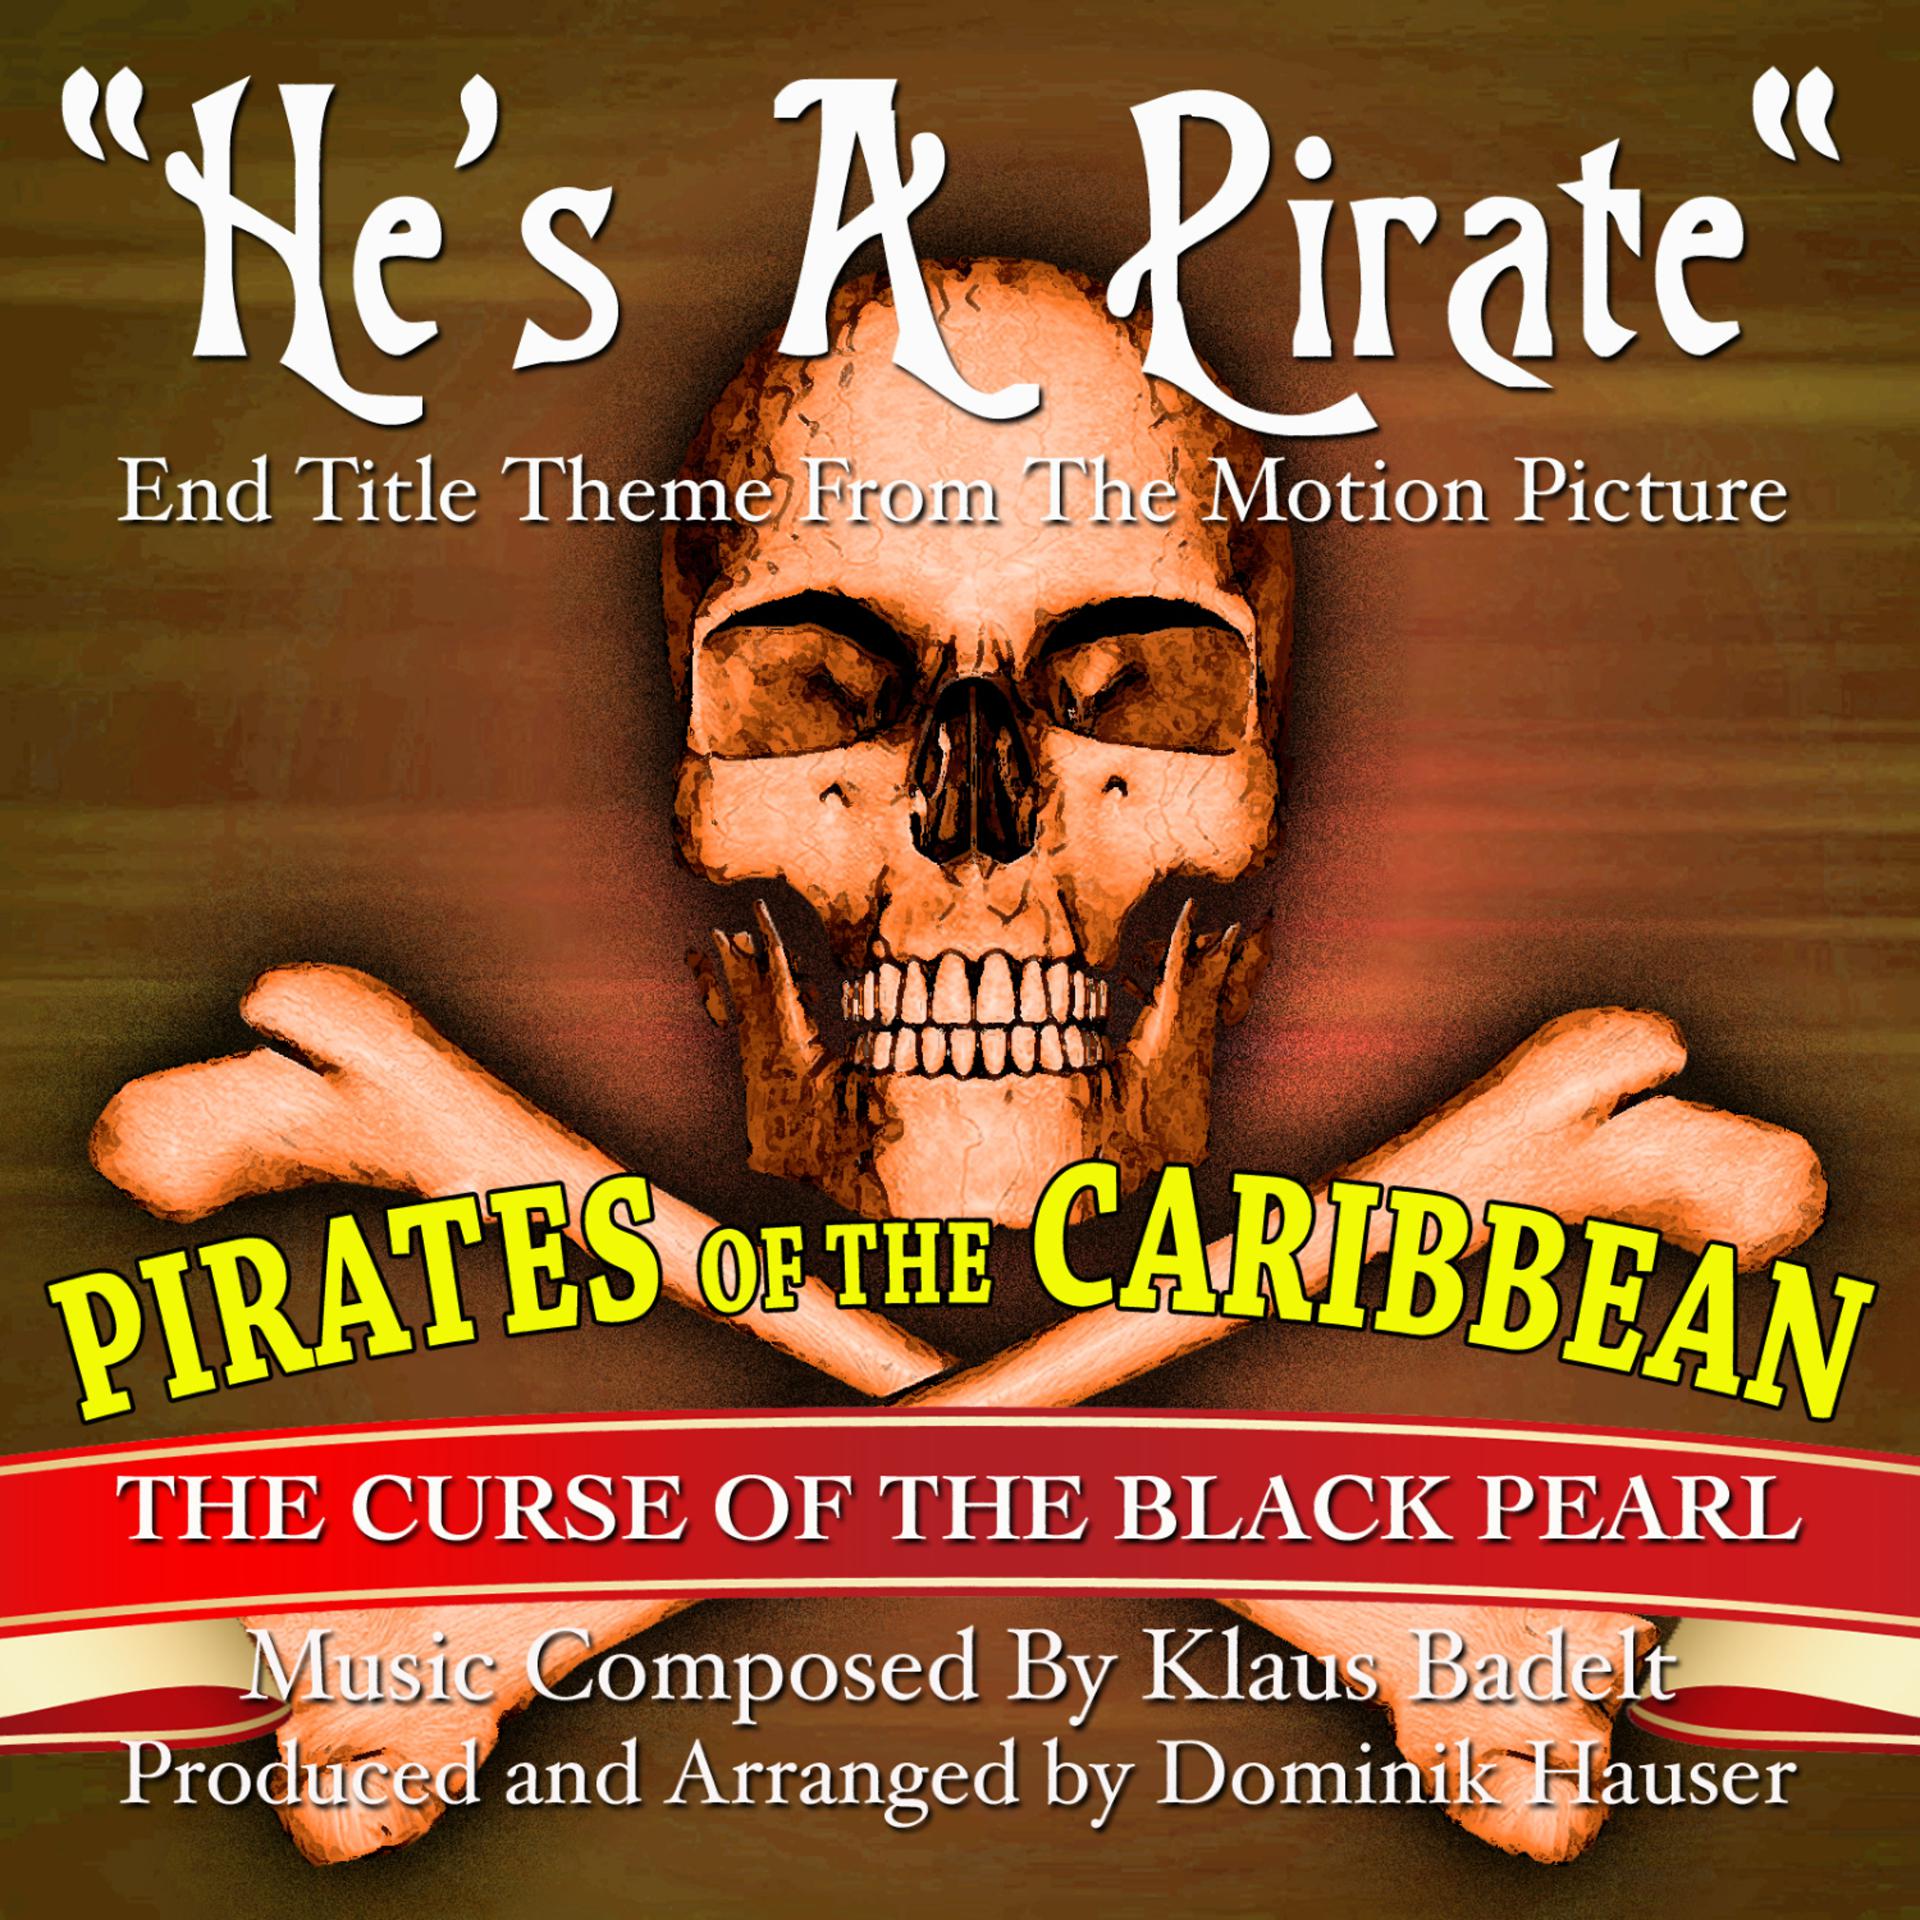 Постер альбома "He's A Pirate"- End Title Theme from the Motion Picture "Pirates Of The Caribbean, The Curse Of The Black Pearl"